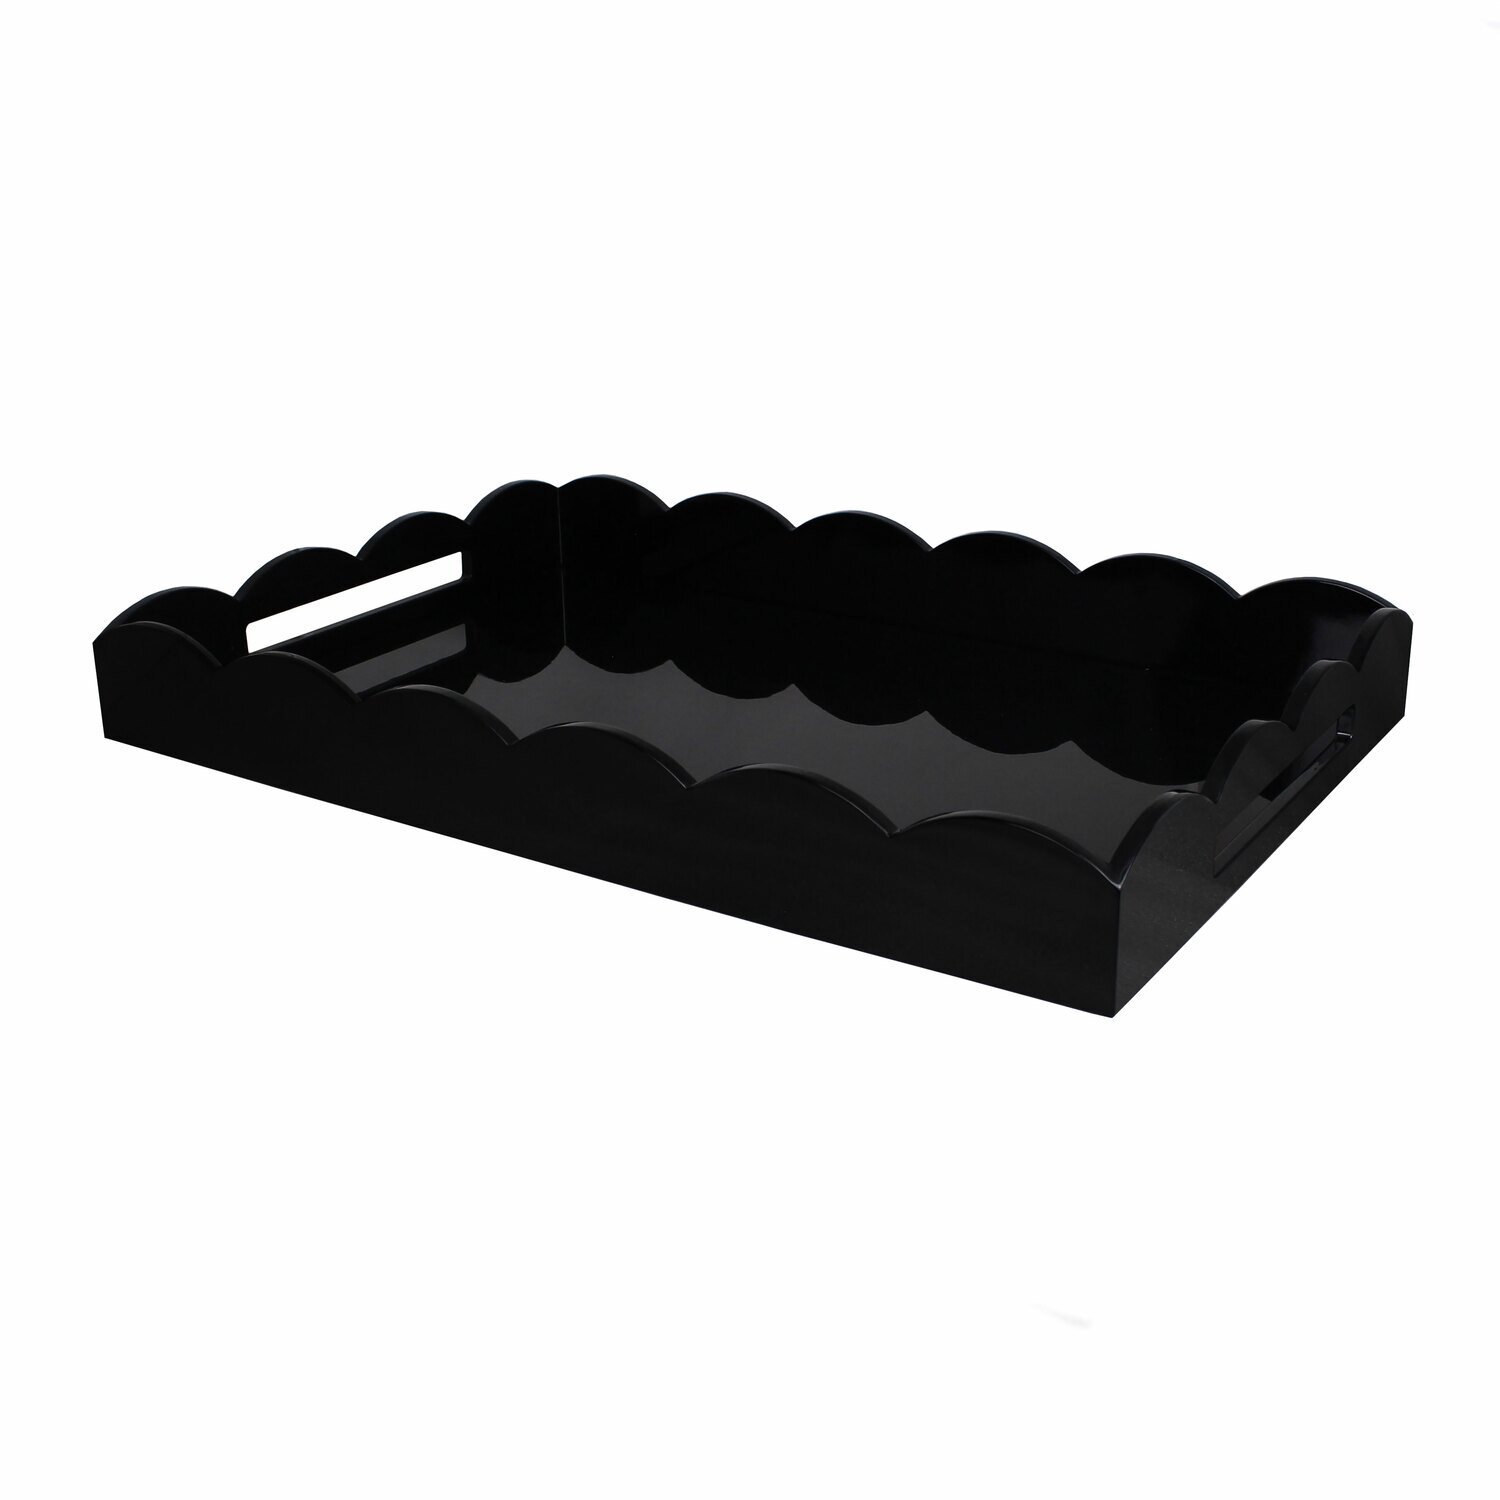 Addison Ross Large Black Scalloped Edge Tray 26 x 17 Inch Lacquer TR3012